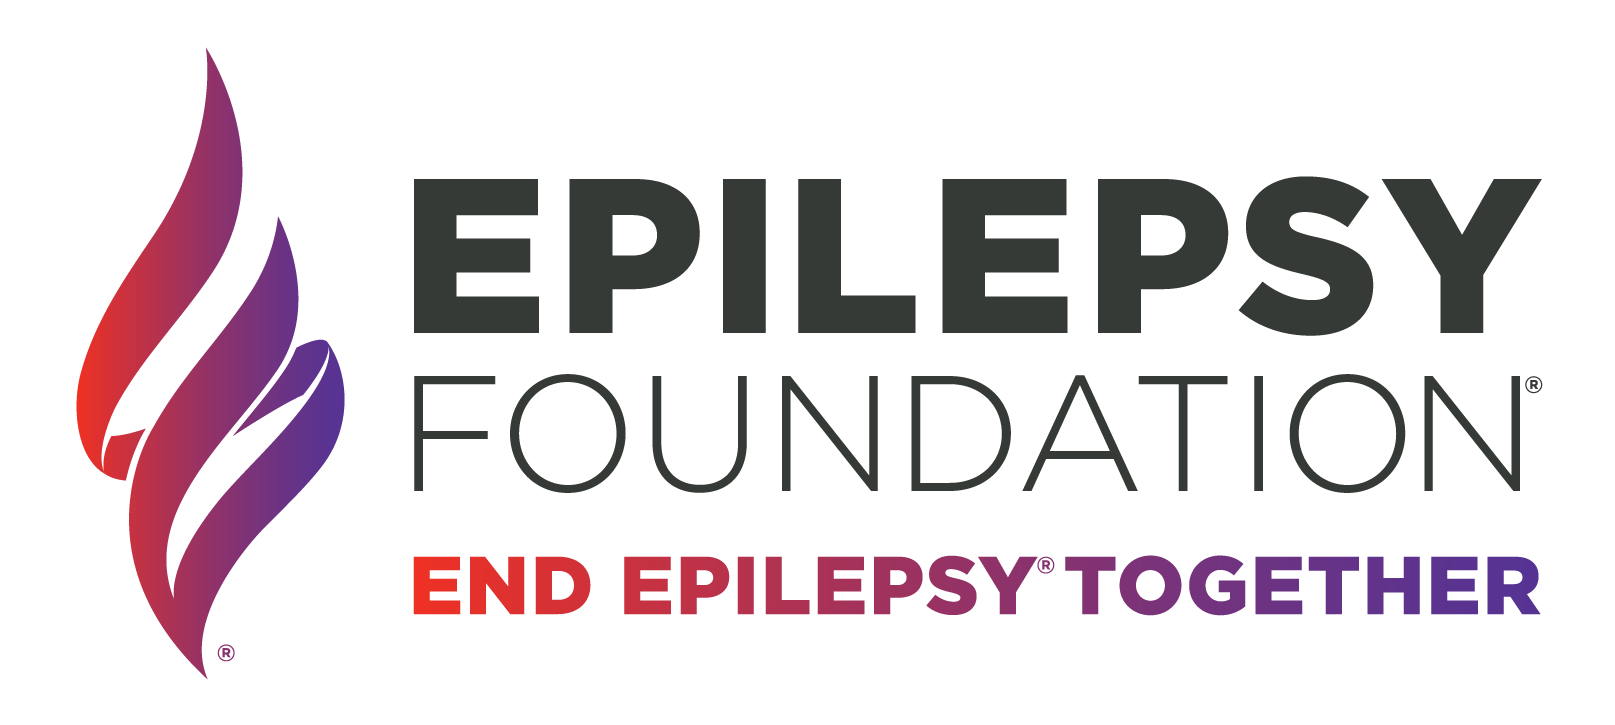 Become an Epilepsy Advocate